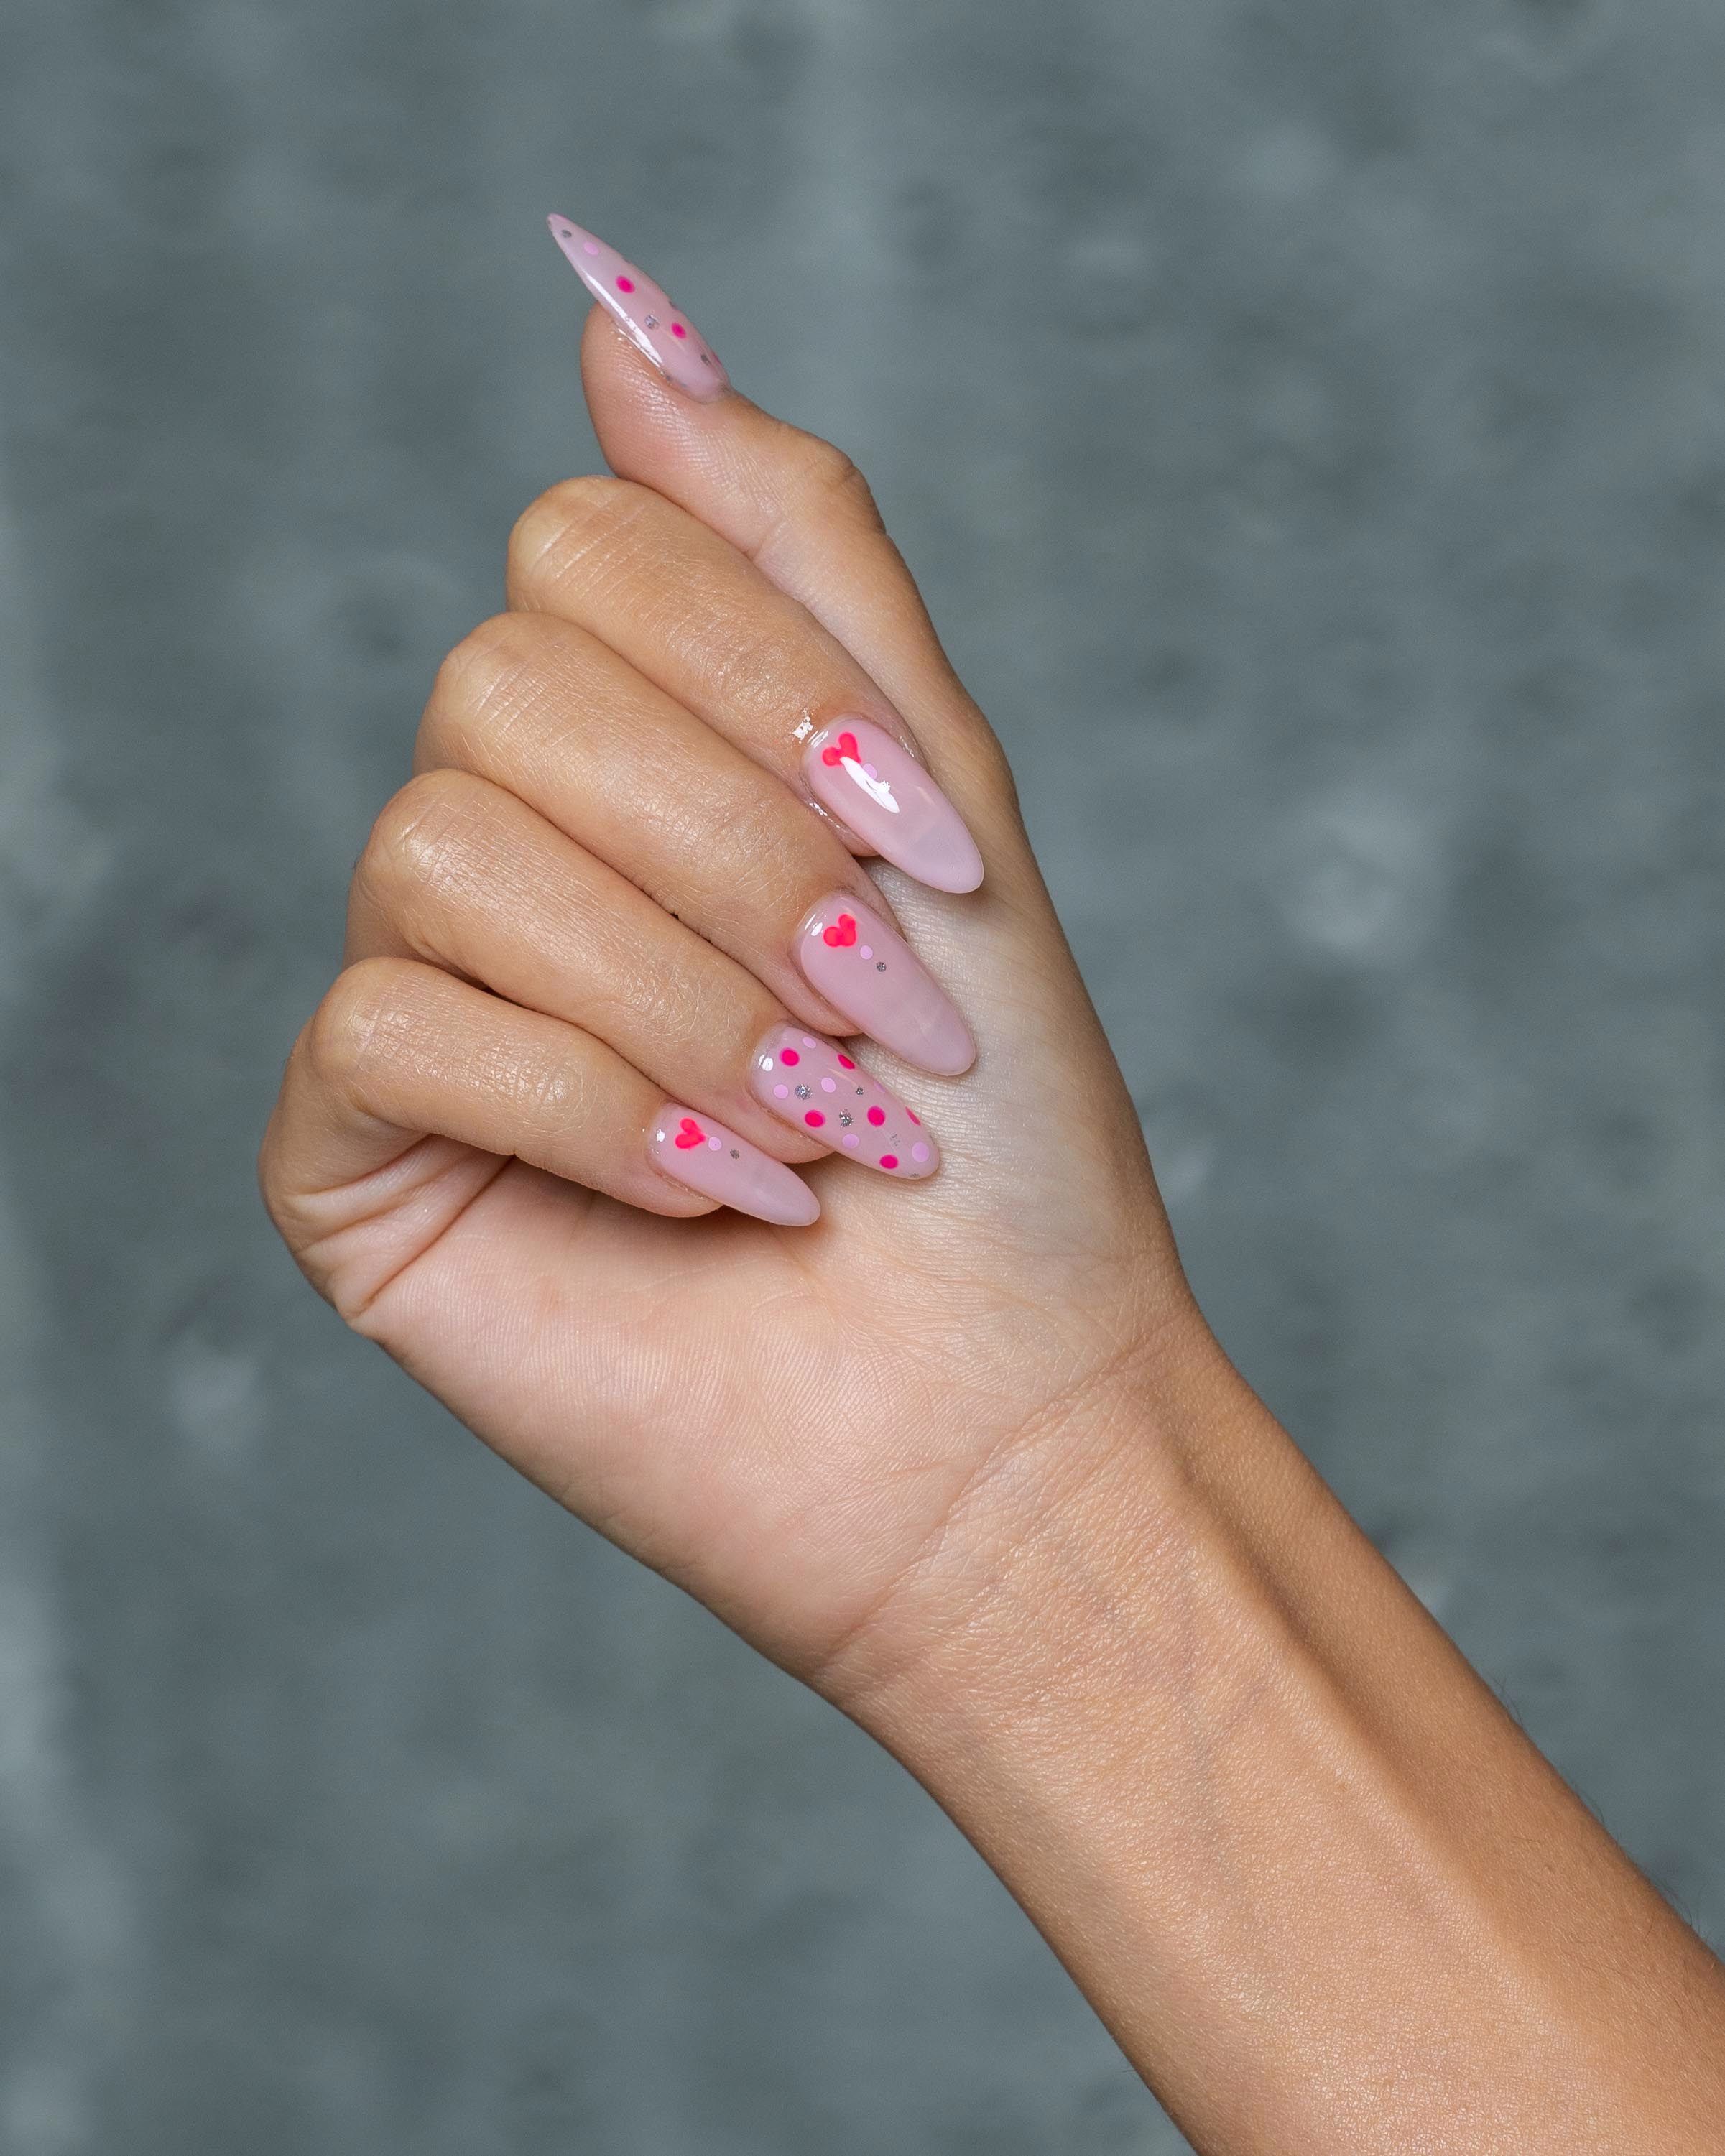 Crystal Nails USA - Pink color gradient nails with the 3 Step CrystaLac gel  polishes: 3S106, 3S107, 3S108 💜💕 🛒:  https://www.crystalnails.com/webshop/3step-gel-polish/3-Step-Crystalac-gel-polish---in-matching-bottles-552_455139  | Facebook